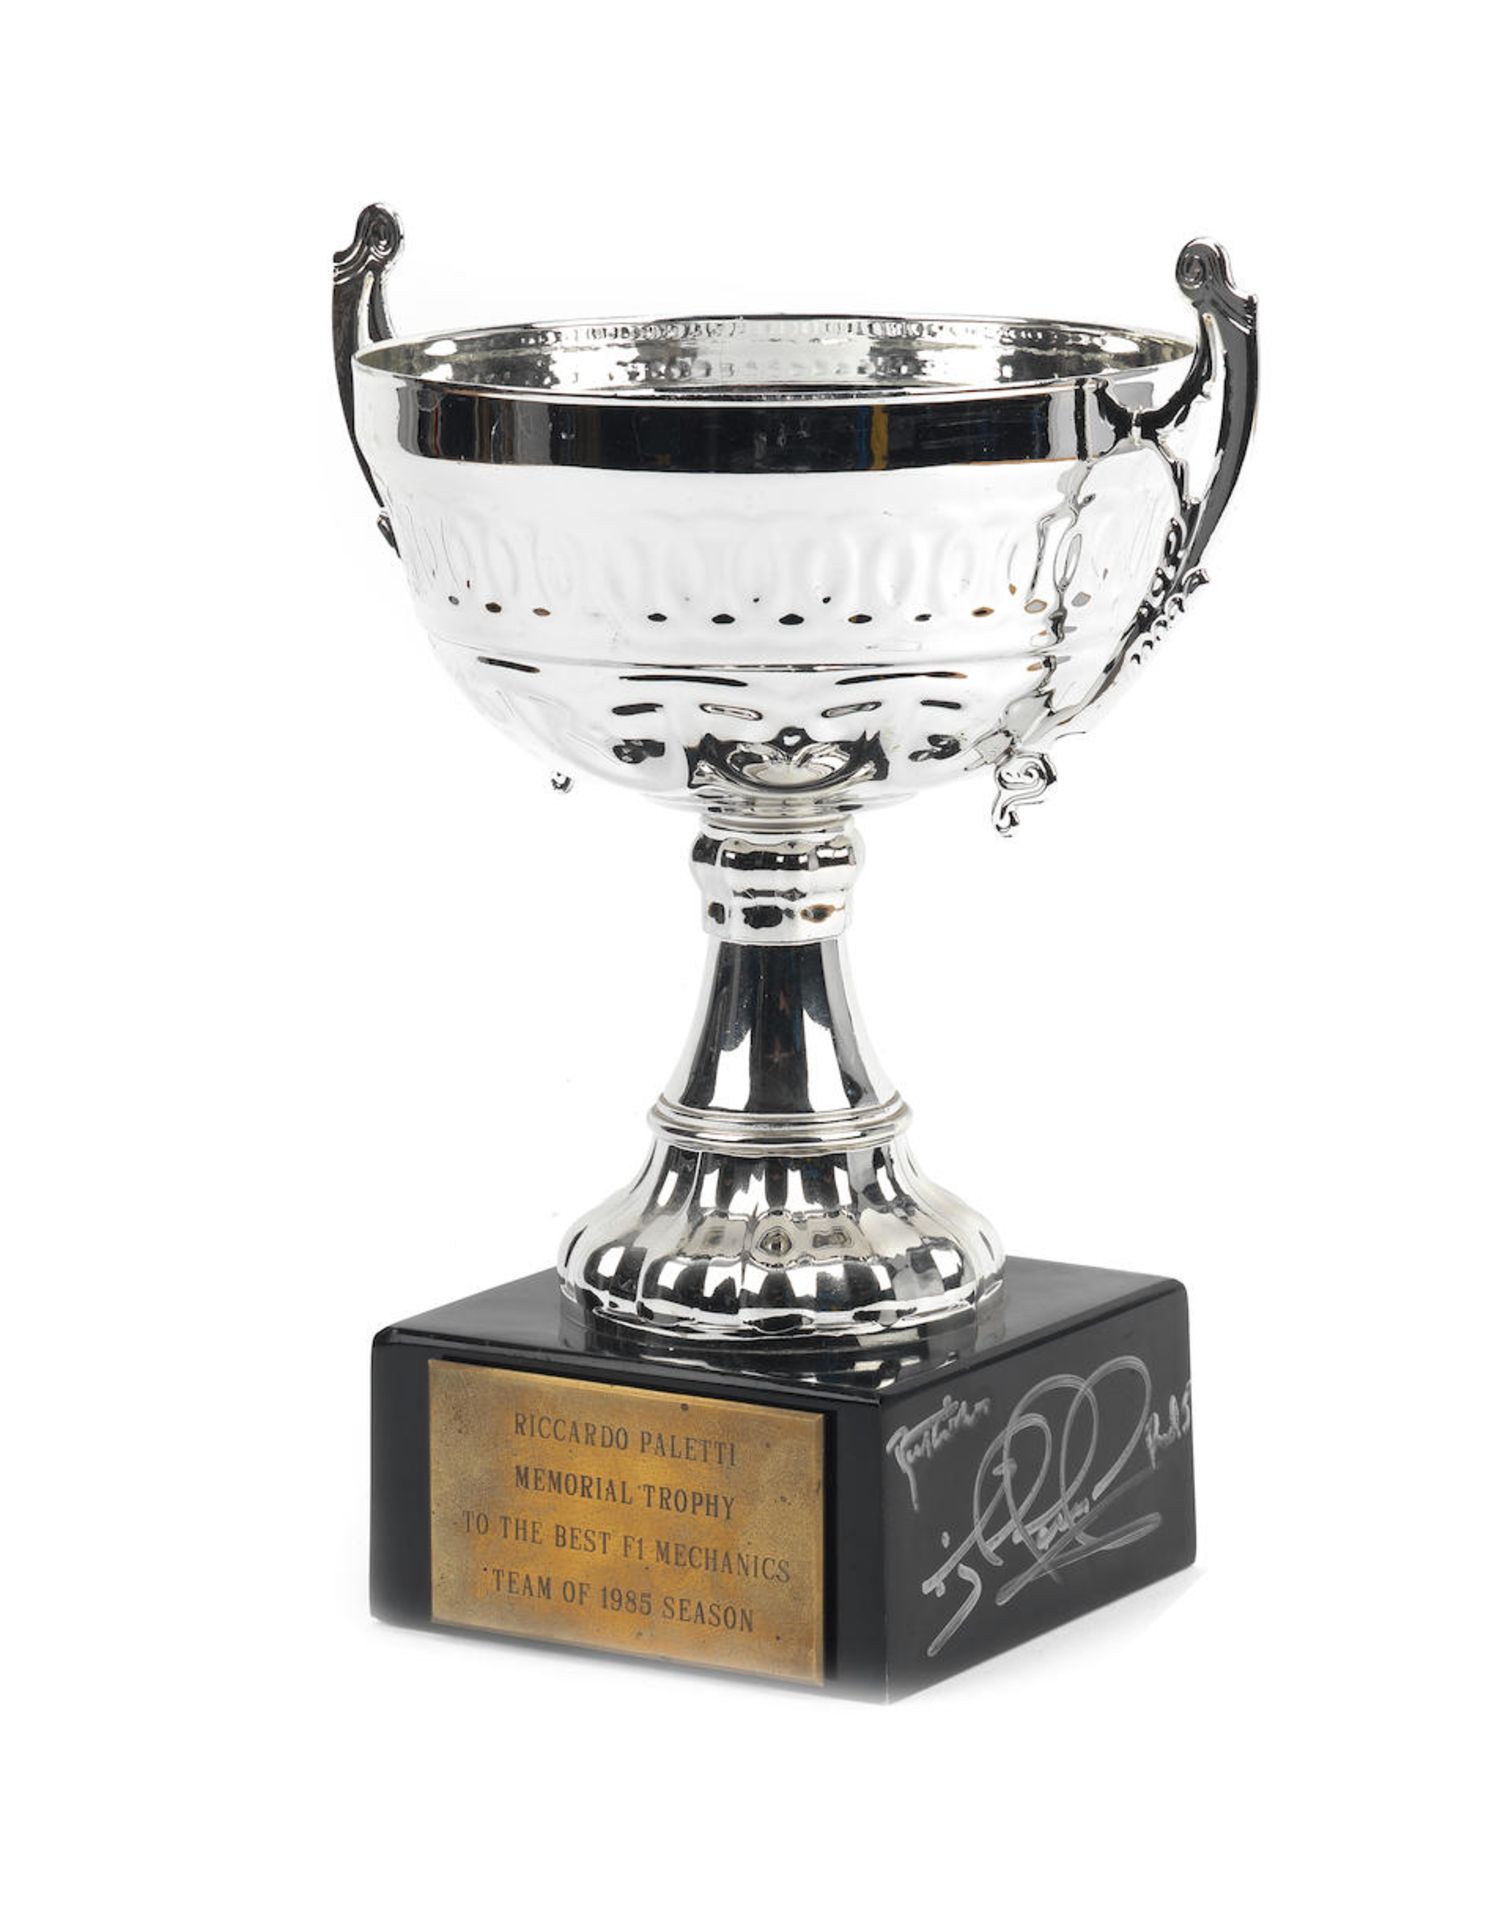 The Riccardo Paletti Memorial Trophy awarded to the 1985 Williams F1 team, signed by Nigel Mansell,